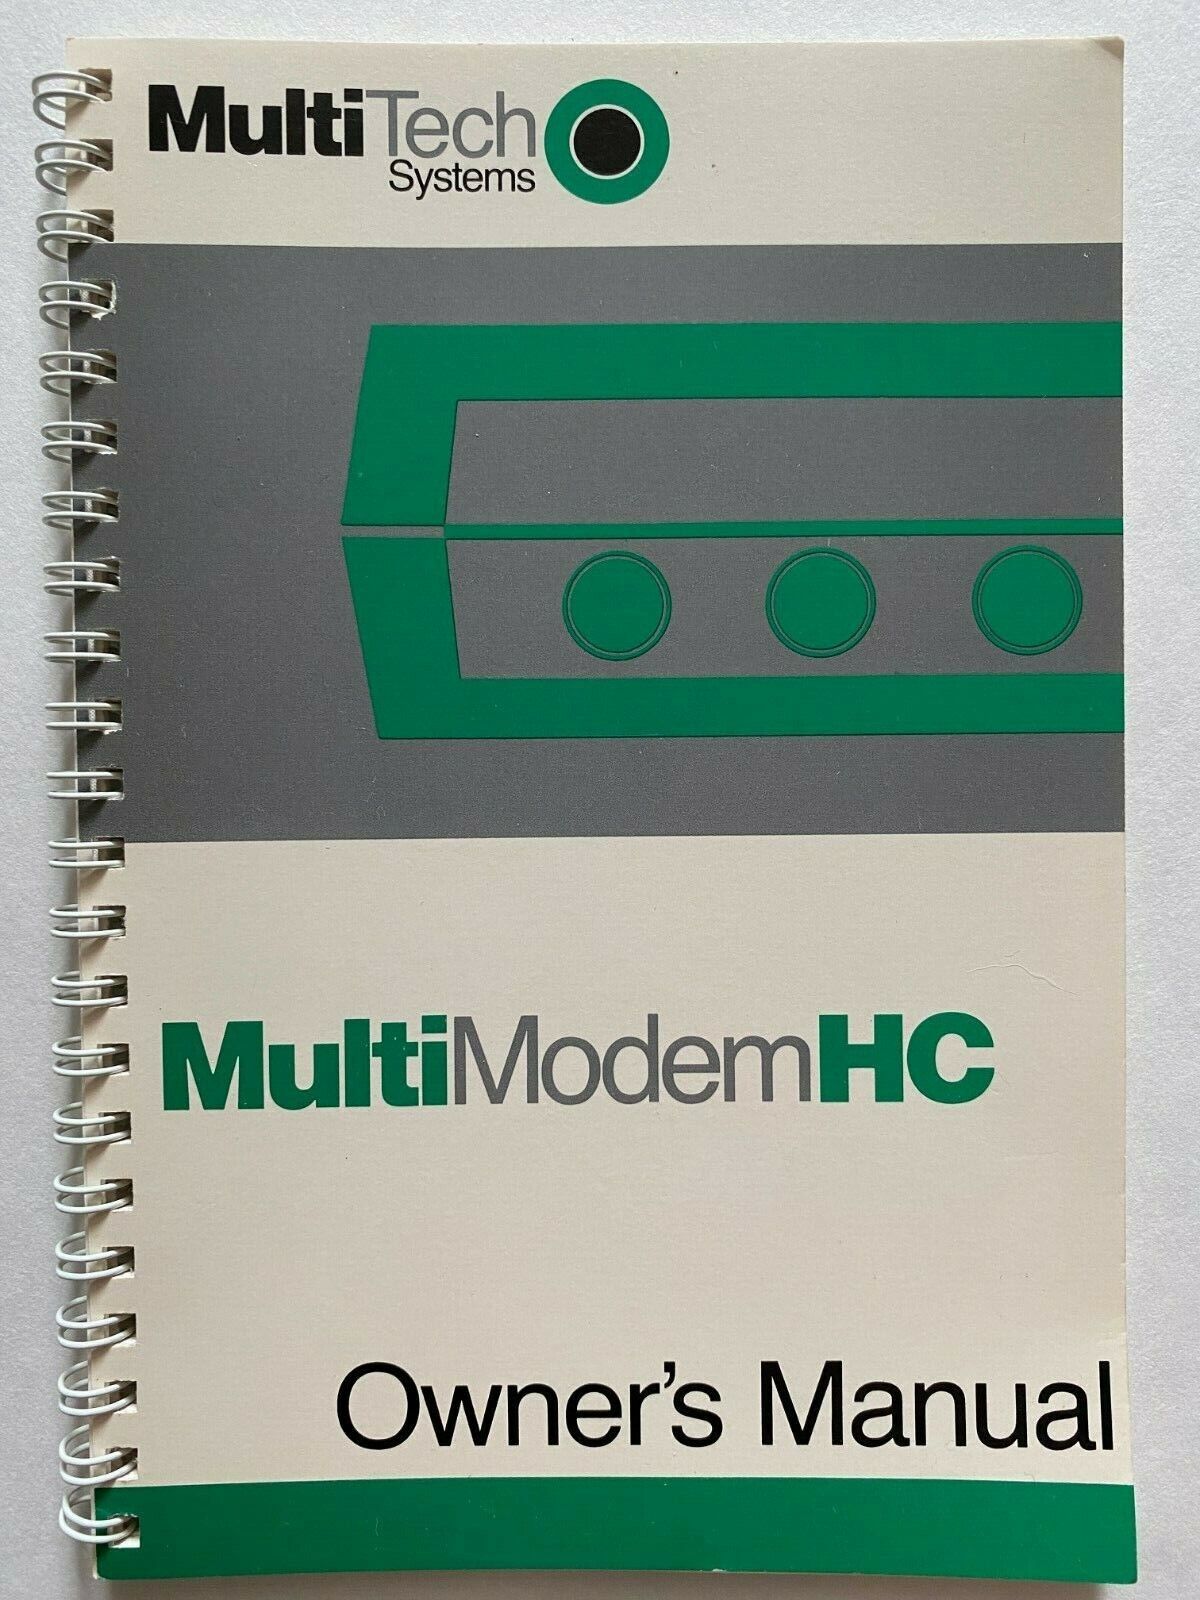 Vintage 1980s MultiTech Systems MultiModem HC Spiral Bound Owners Manual